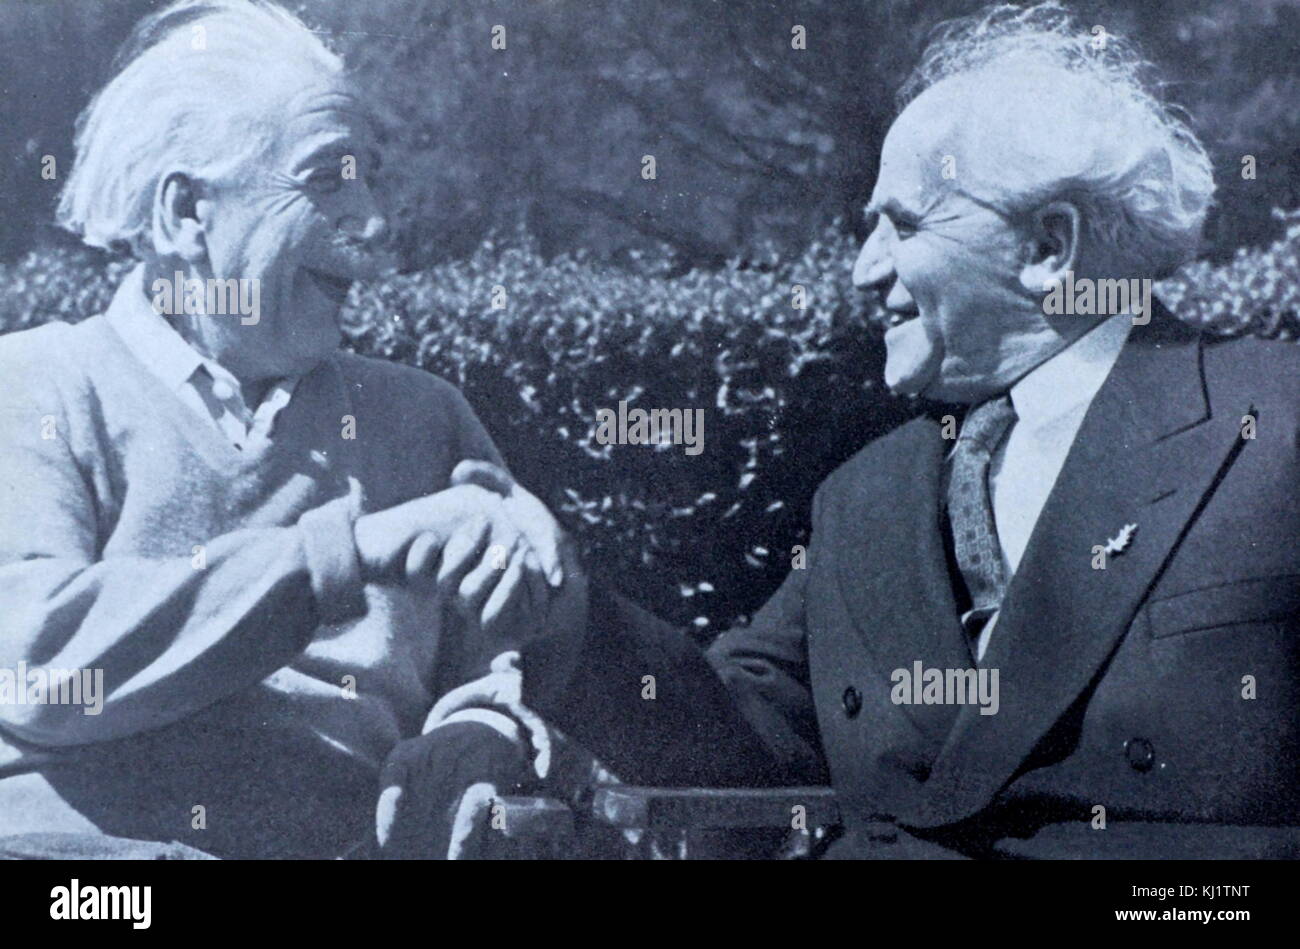 Photograph of Prime Minister of Israel, David Ben-Gurion (1886-1973) meeting with Albert Einstein (1879-1955) at Princeton University, New Jersey. Dated 20th Century Stock Photo